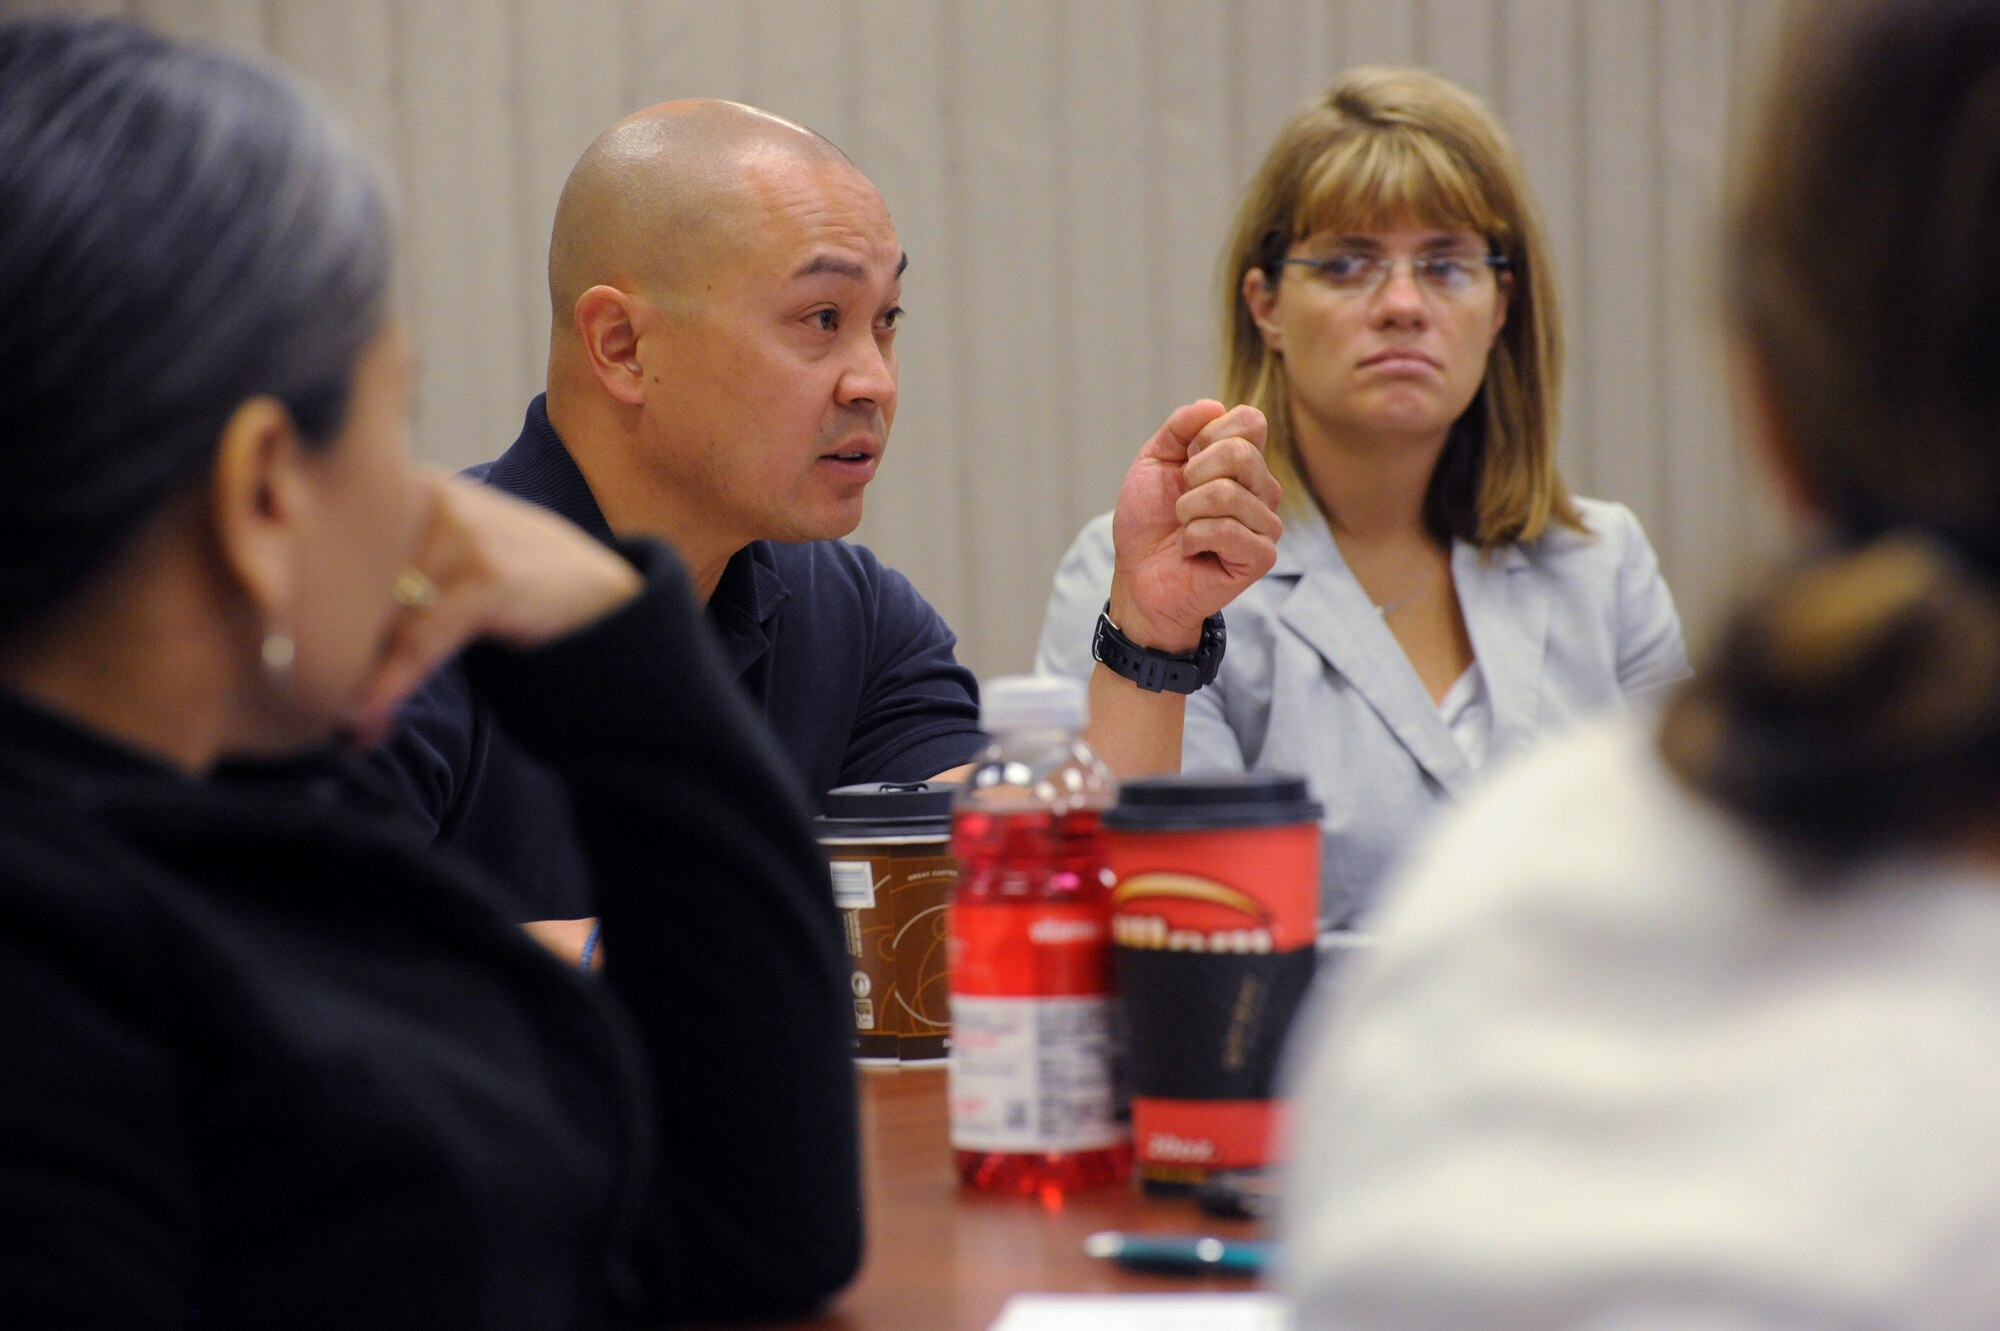 Oregon Army National Guard Capt. Wayne Pong, center left, and other Victim Advocates participate in three days of Sexual Assault Preventing and Response (SAPR) training, June 24-26, Portland Air National Guard Base, Ore. (U.S. Air National Guard photo by Tech. Sgt. John Hughel, 142nd Fighter Wing Public Affairs/Released)